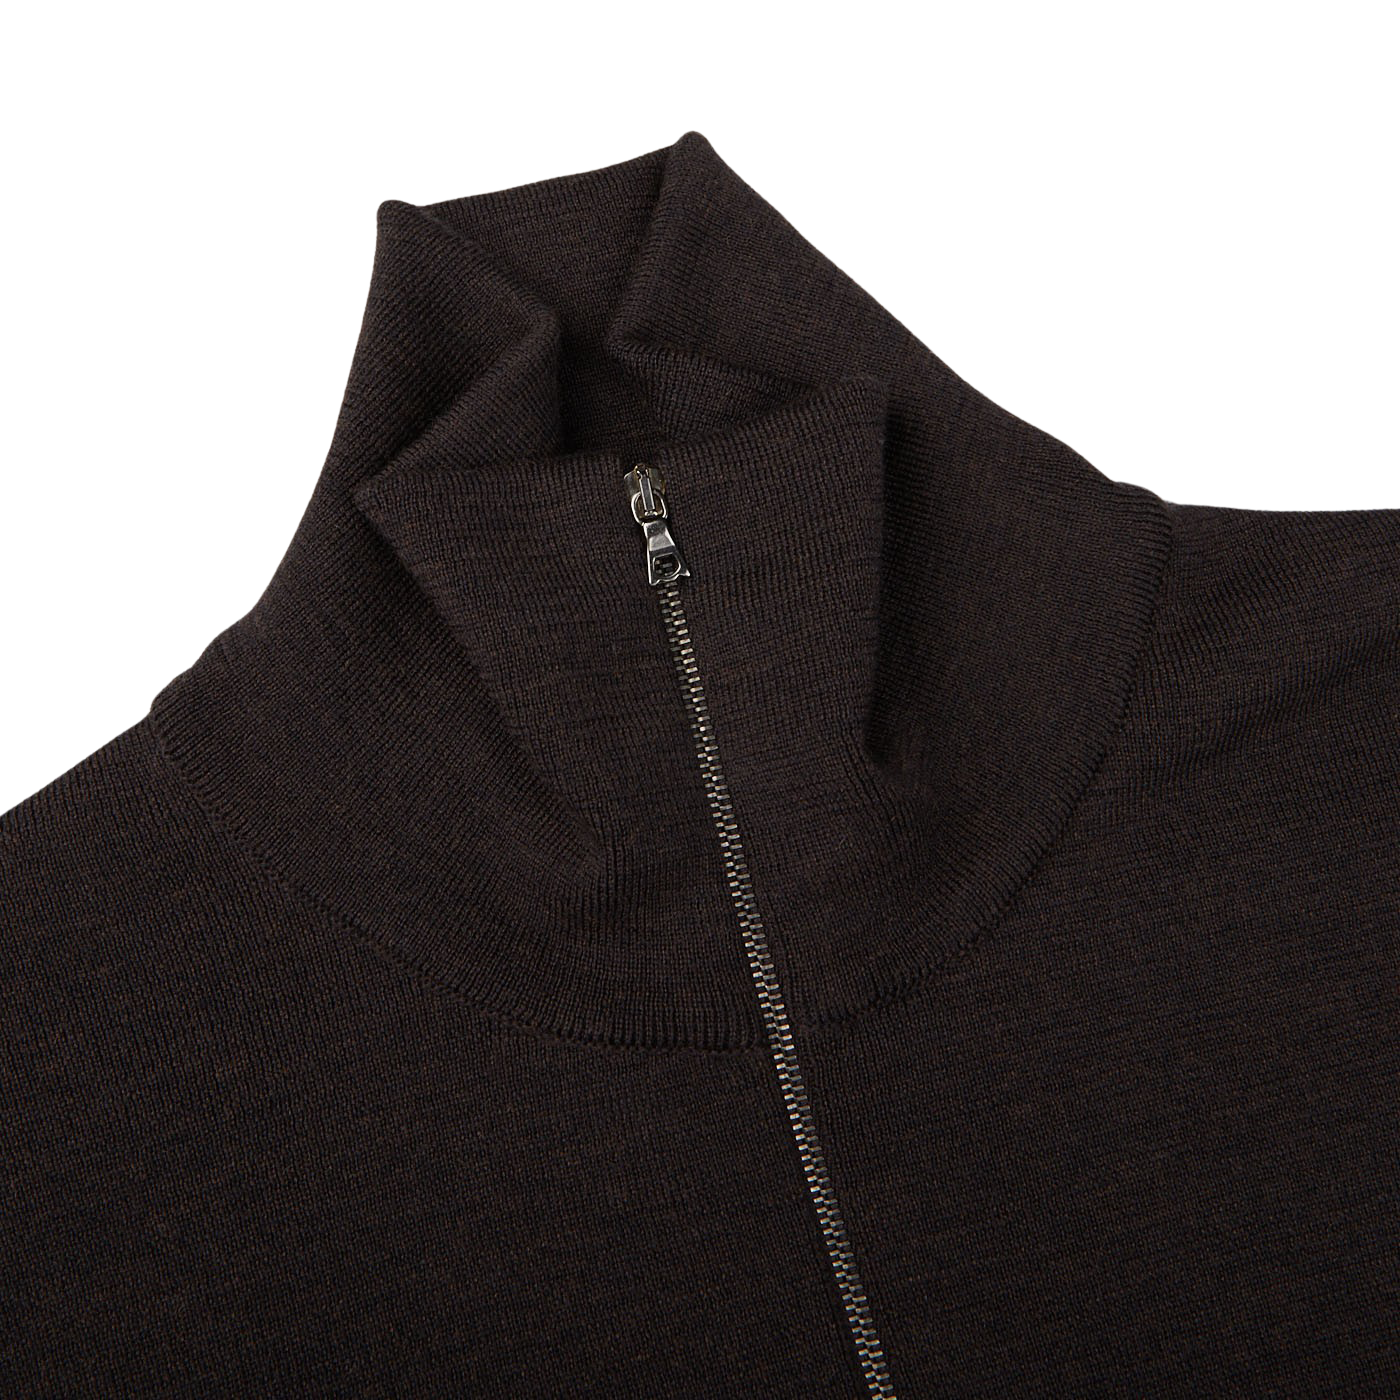 G.R.P Brown Melange Merino Wool Zip Jacket with a zipper on the front.